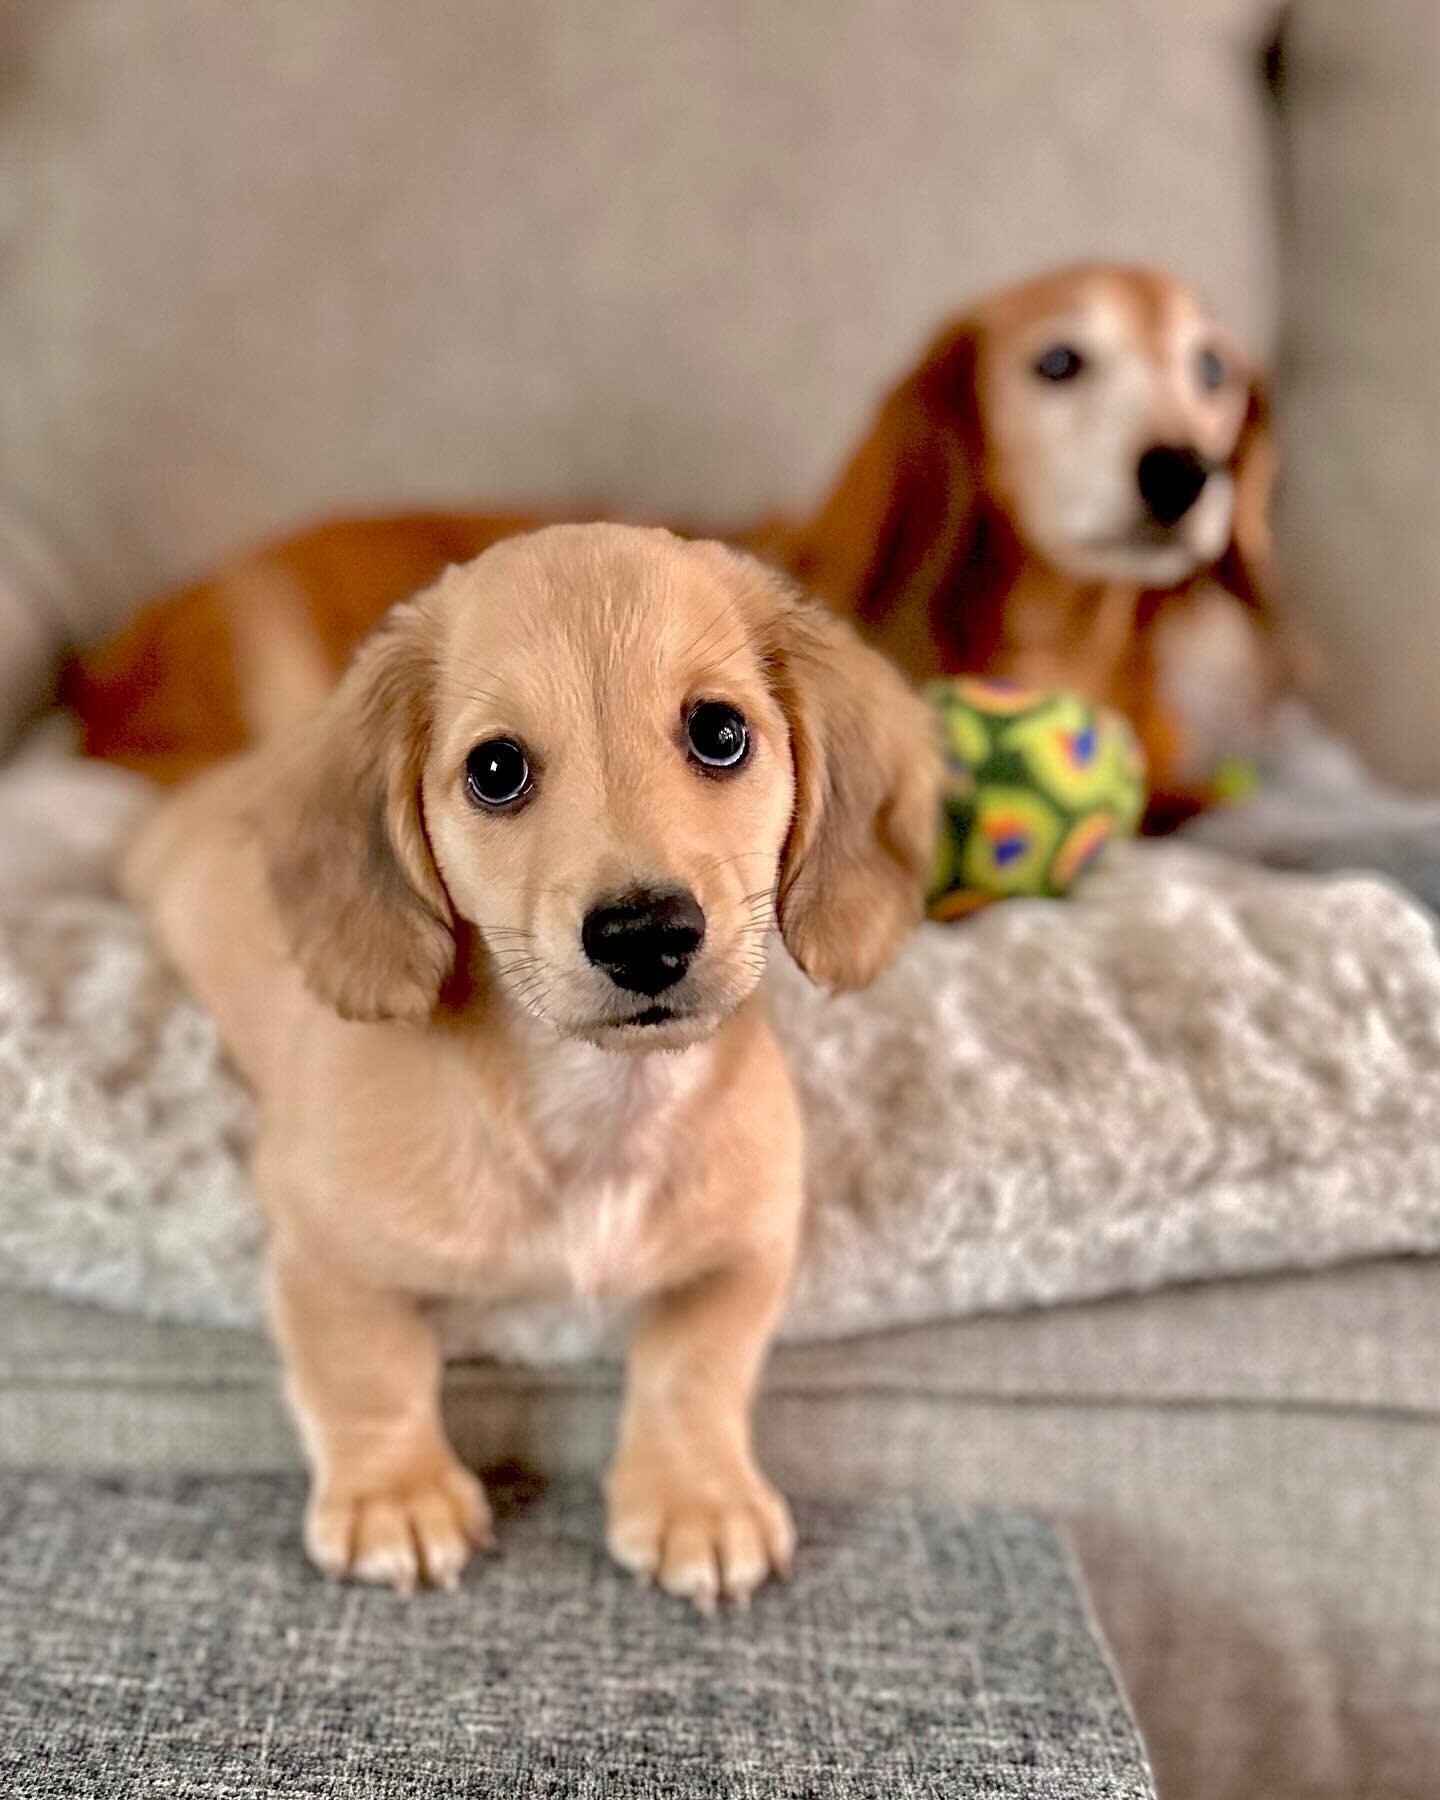 Meet the newest (and tiniest) addition to the Janie Haas Team&mdash;Stewie!💙🐾 

He&rsquo;s stepping into his role as CCO (Chief Cuddle Officer) alongside big sister Roxi, our longtime CEO. And, as you can see, has made himself right at home in the 